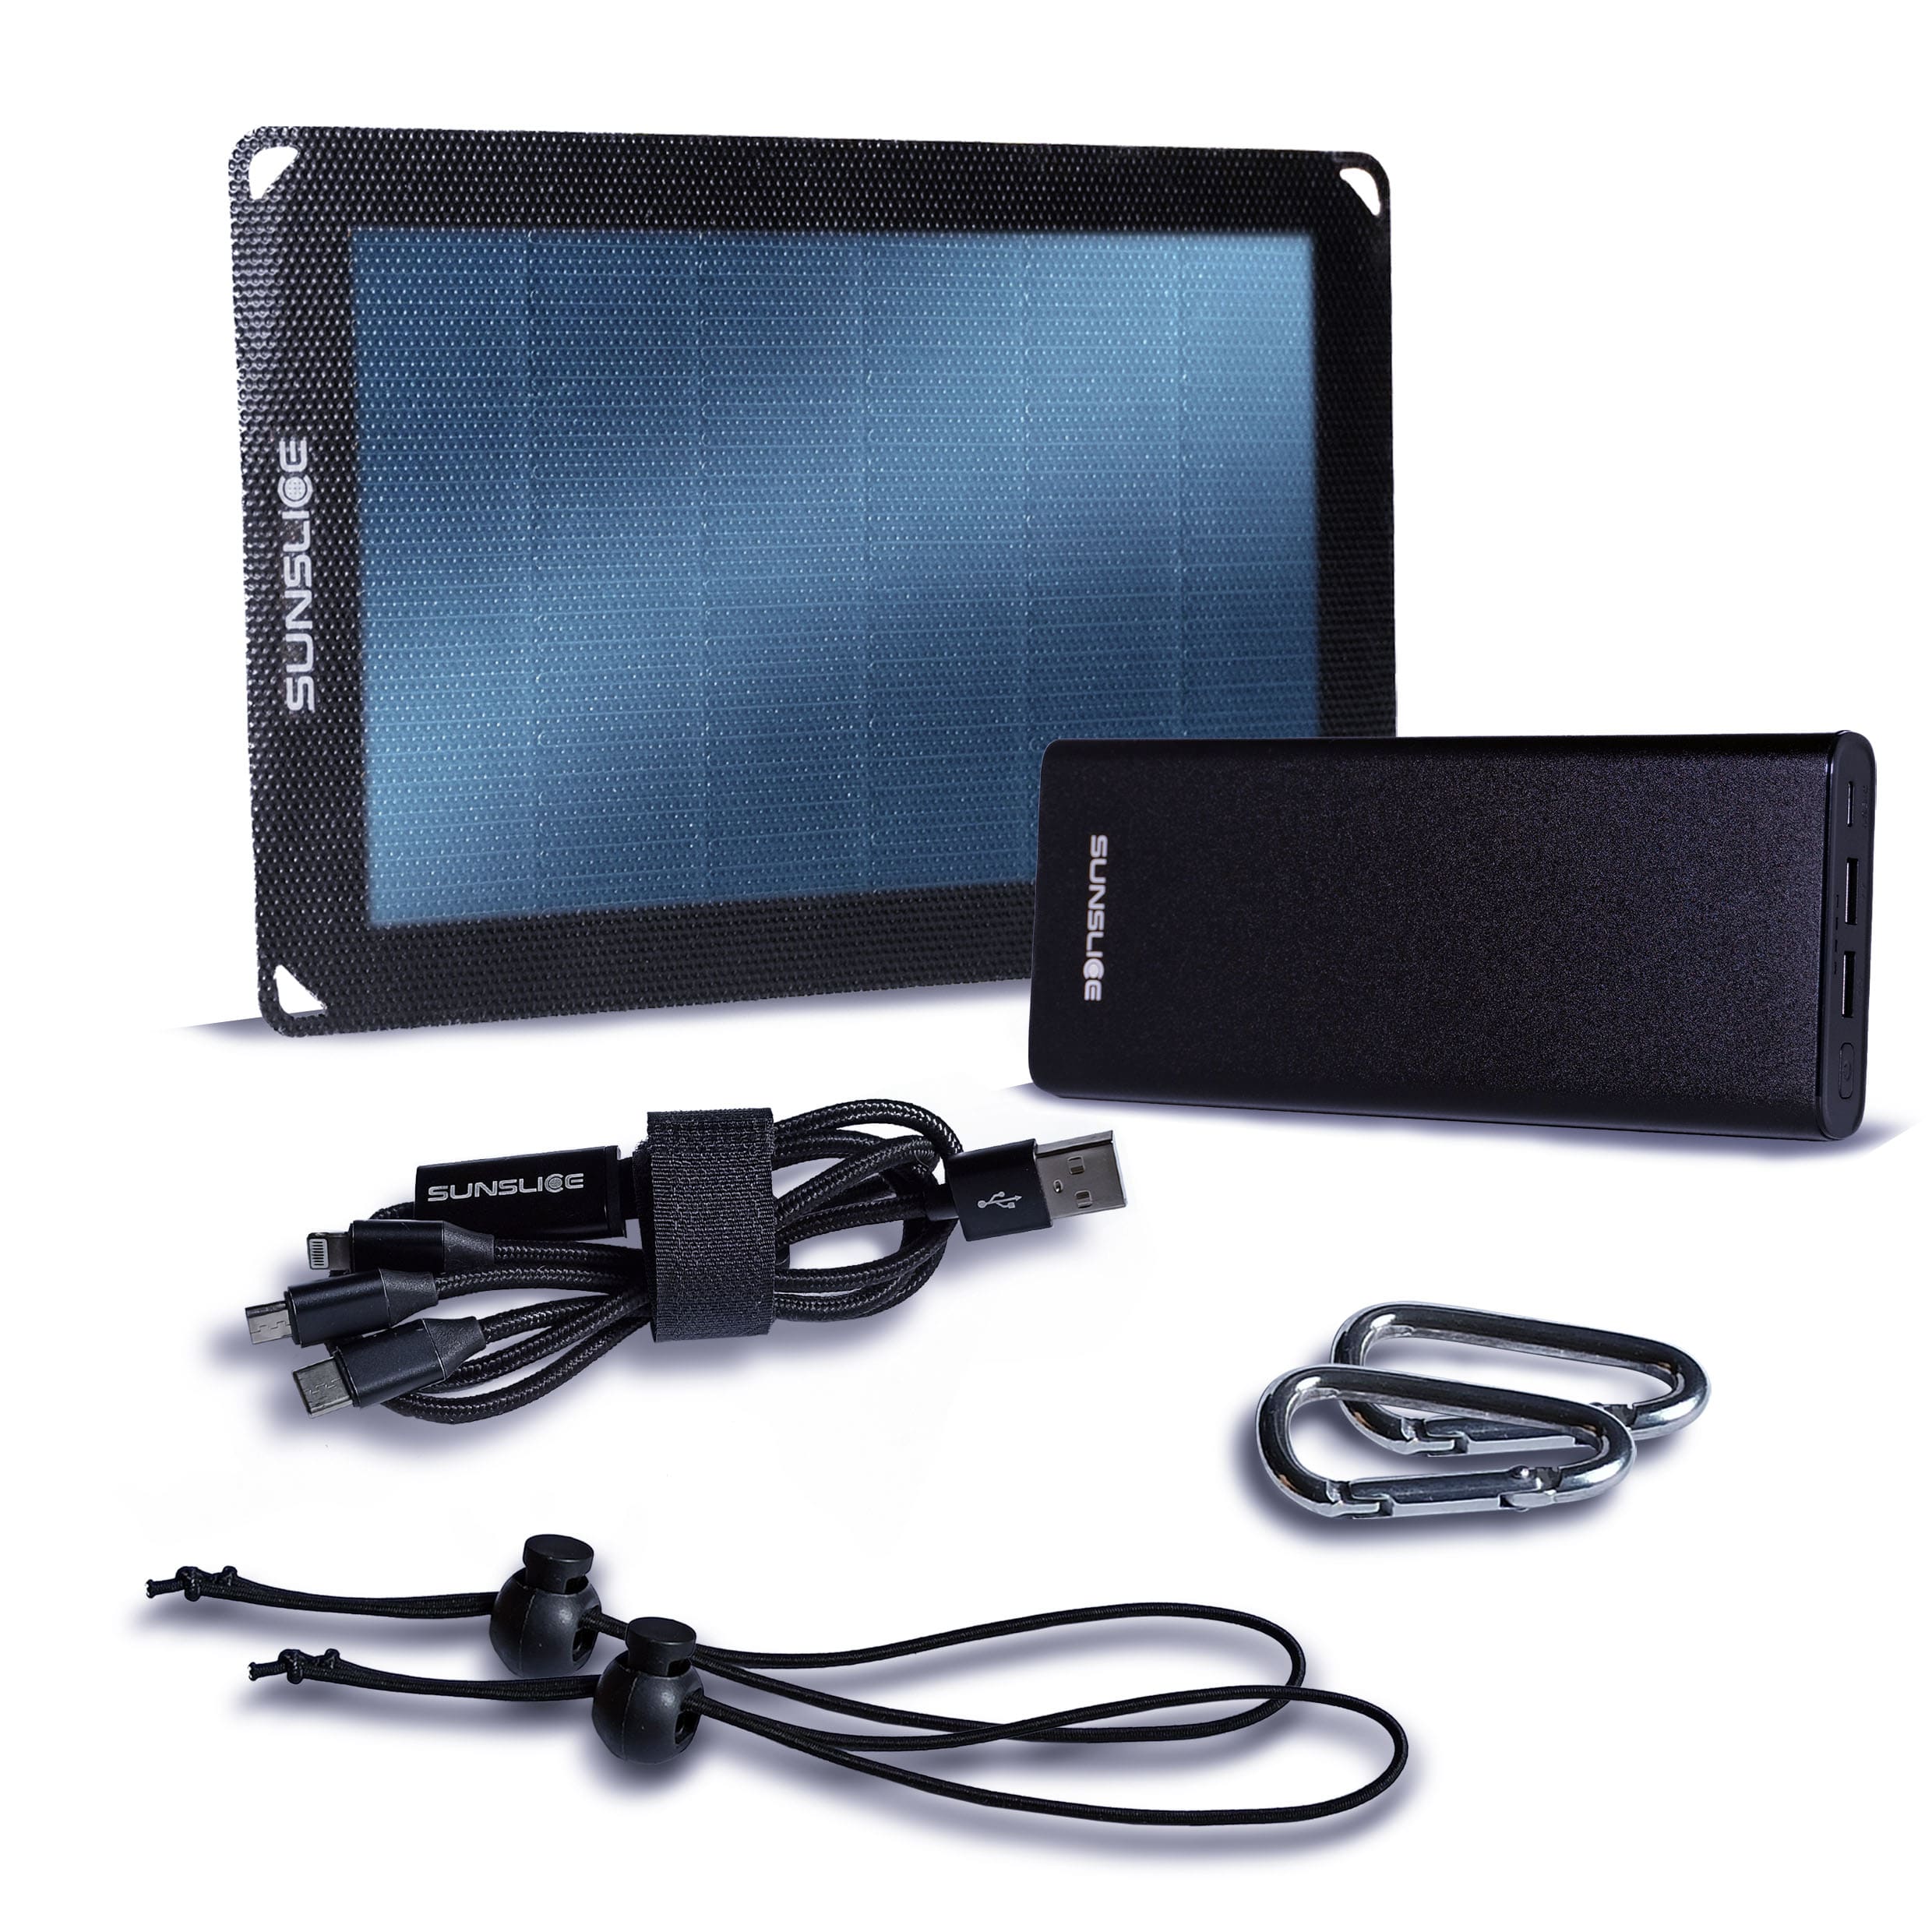 Kit with a solar panel fusion flex 6 and a Gravity 100 power bank for laptop + 2 carabiner , 2 elastic band, 1 trident cable